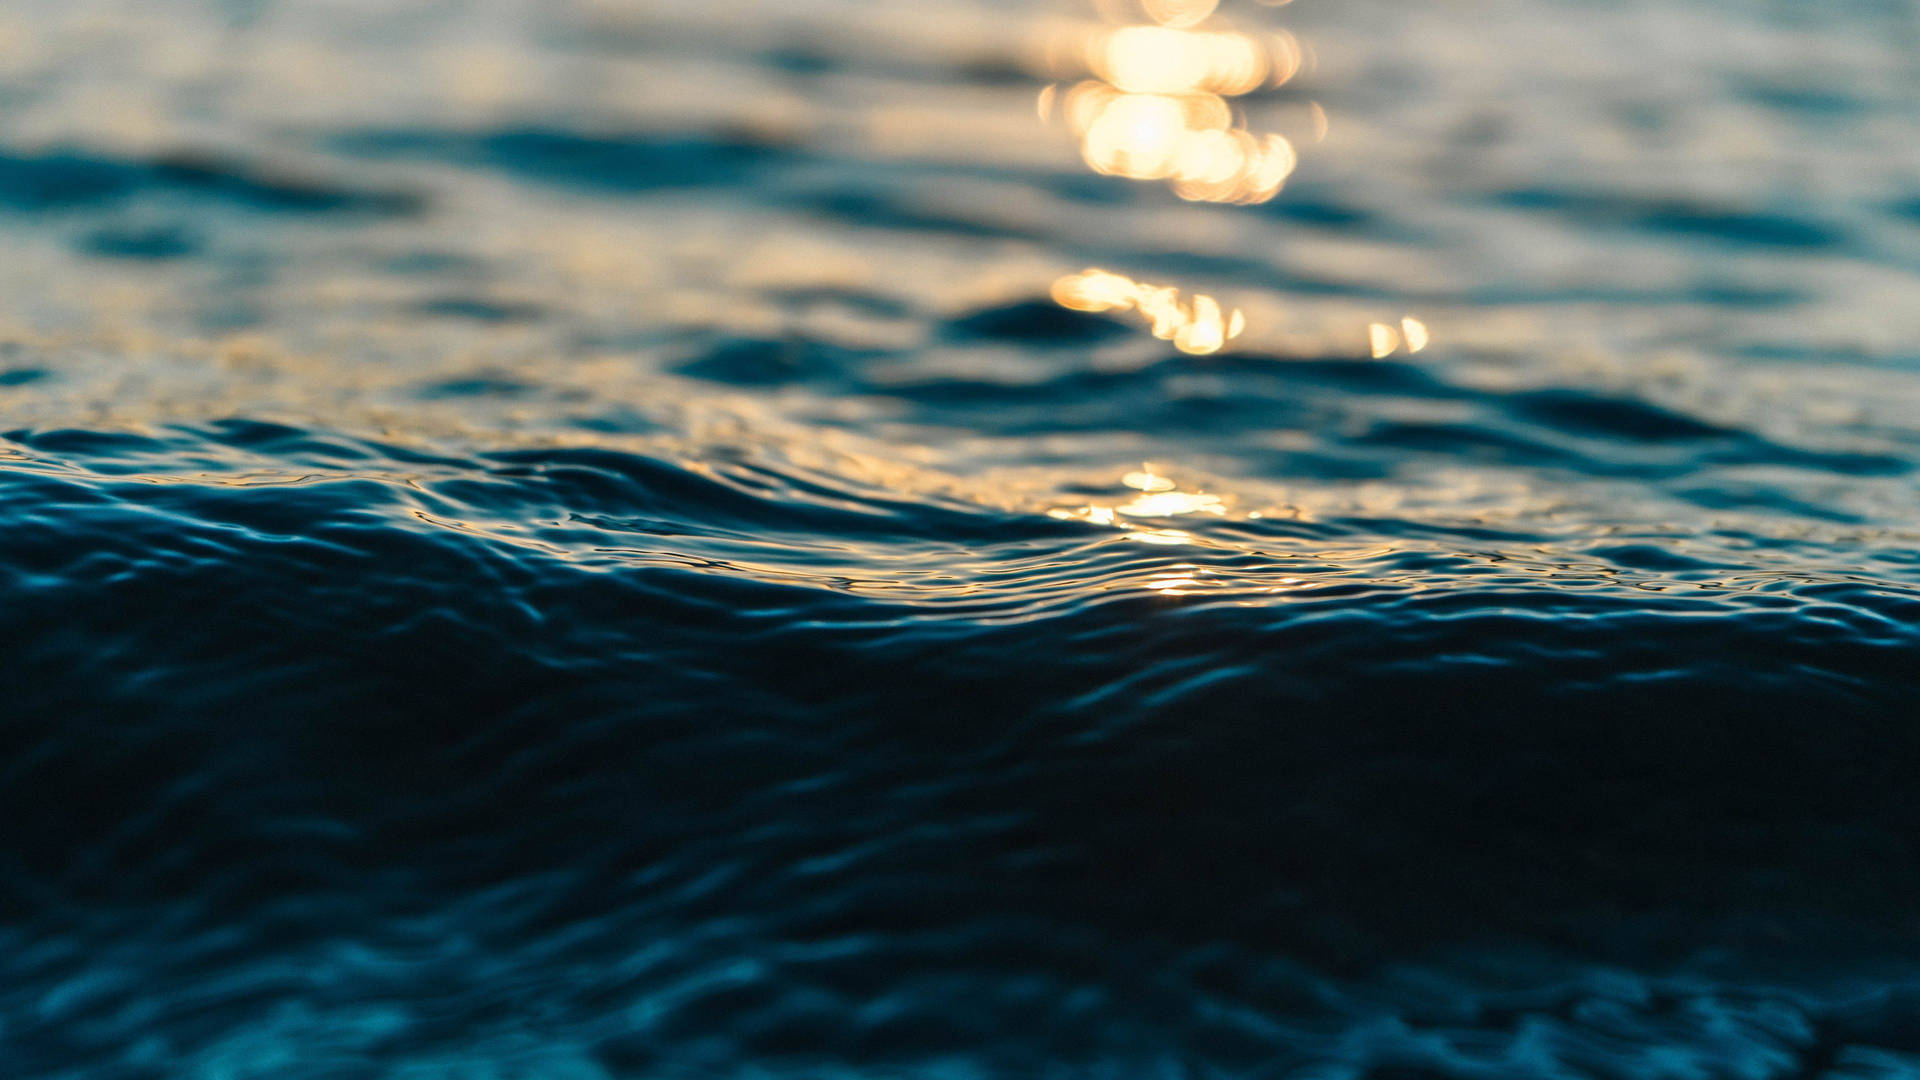 Water Surface Aesthetic Dark Blue Hd Background